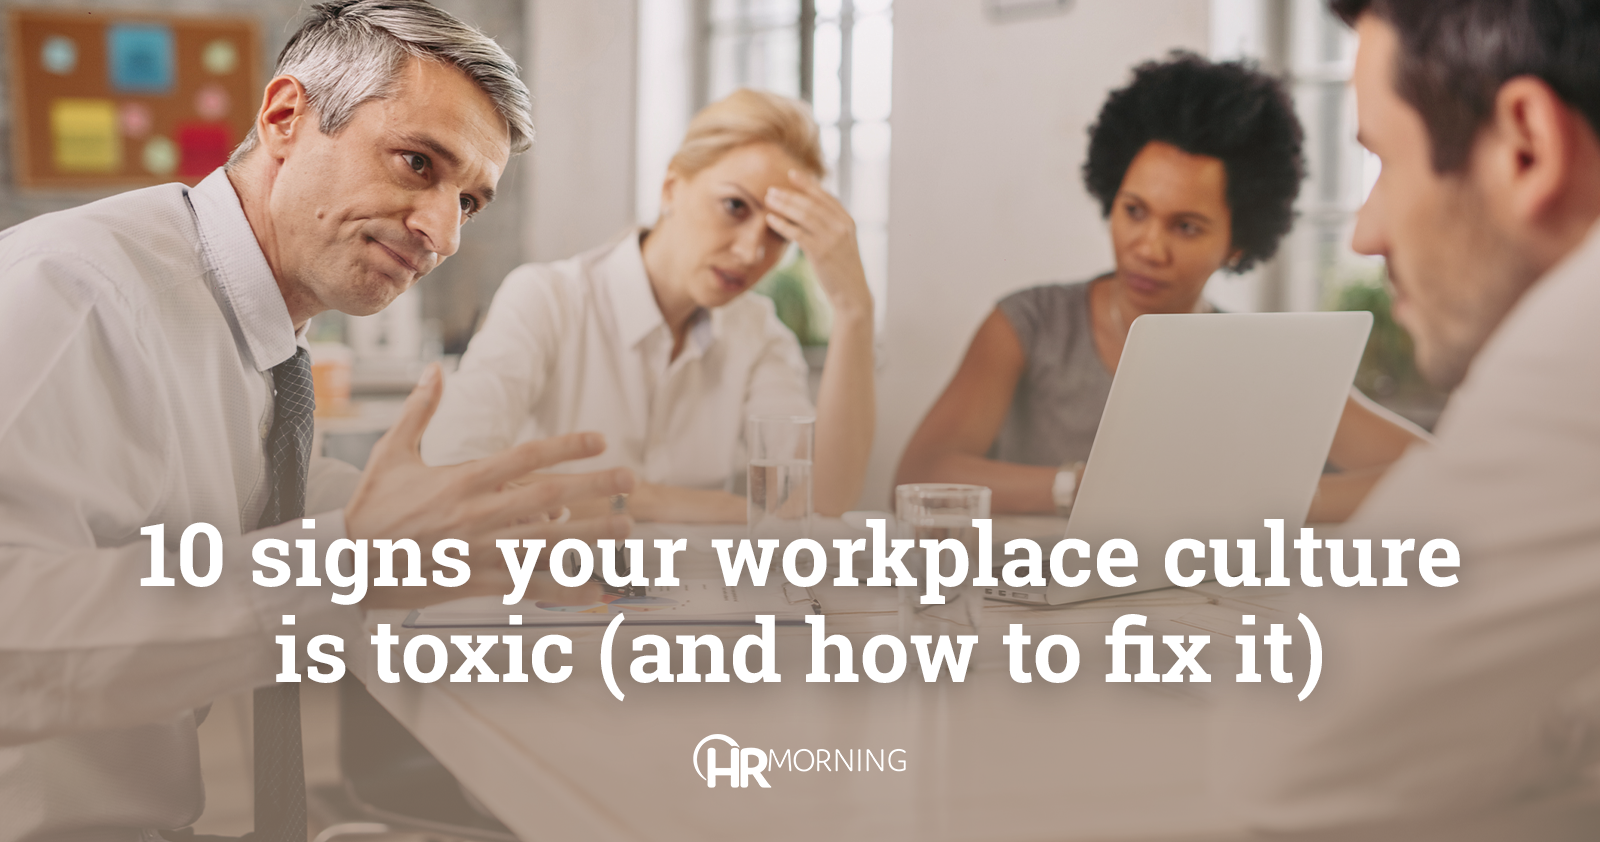 10 signs your workplace culture is toxic